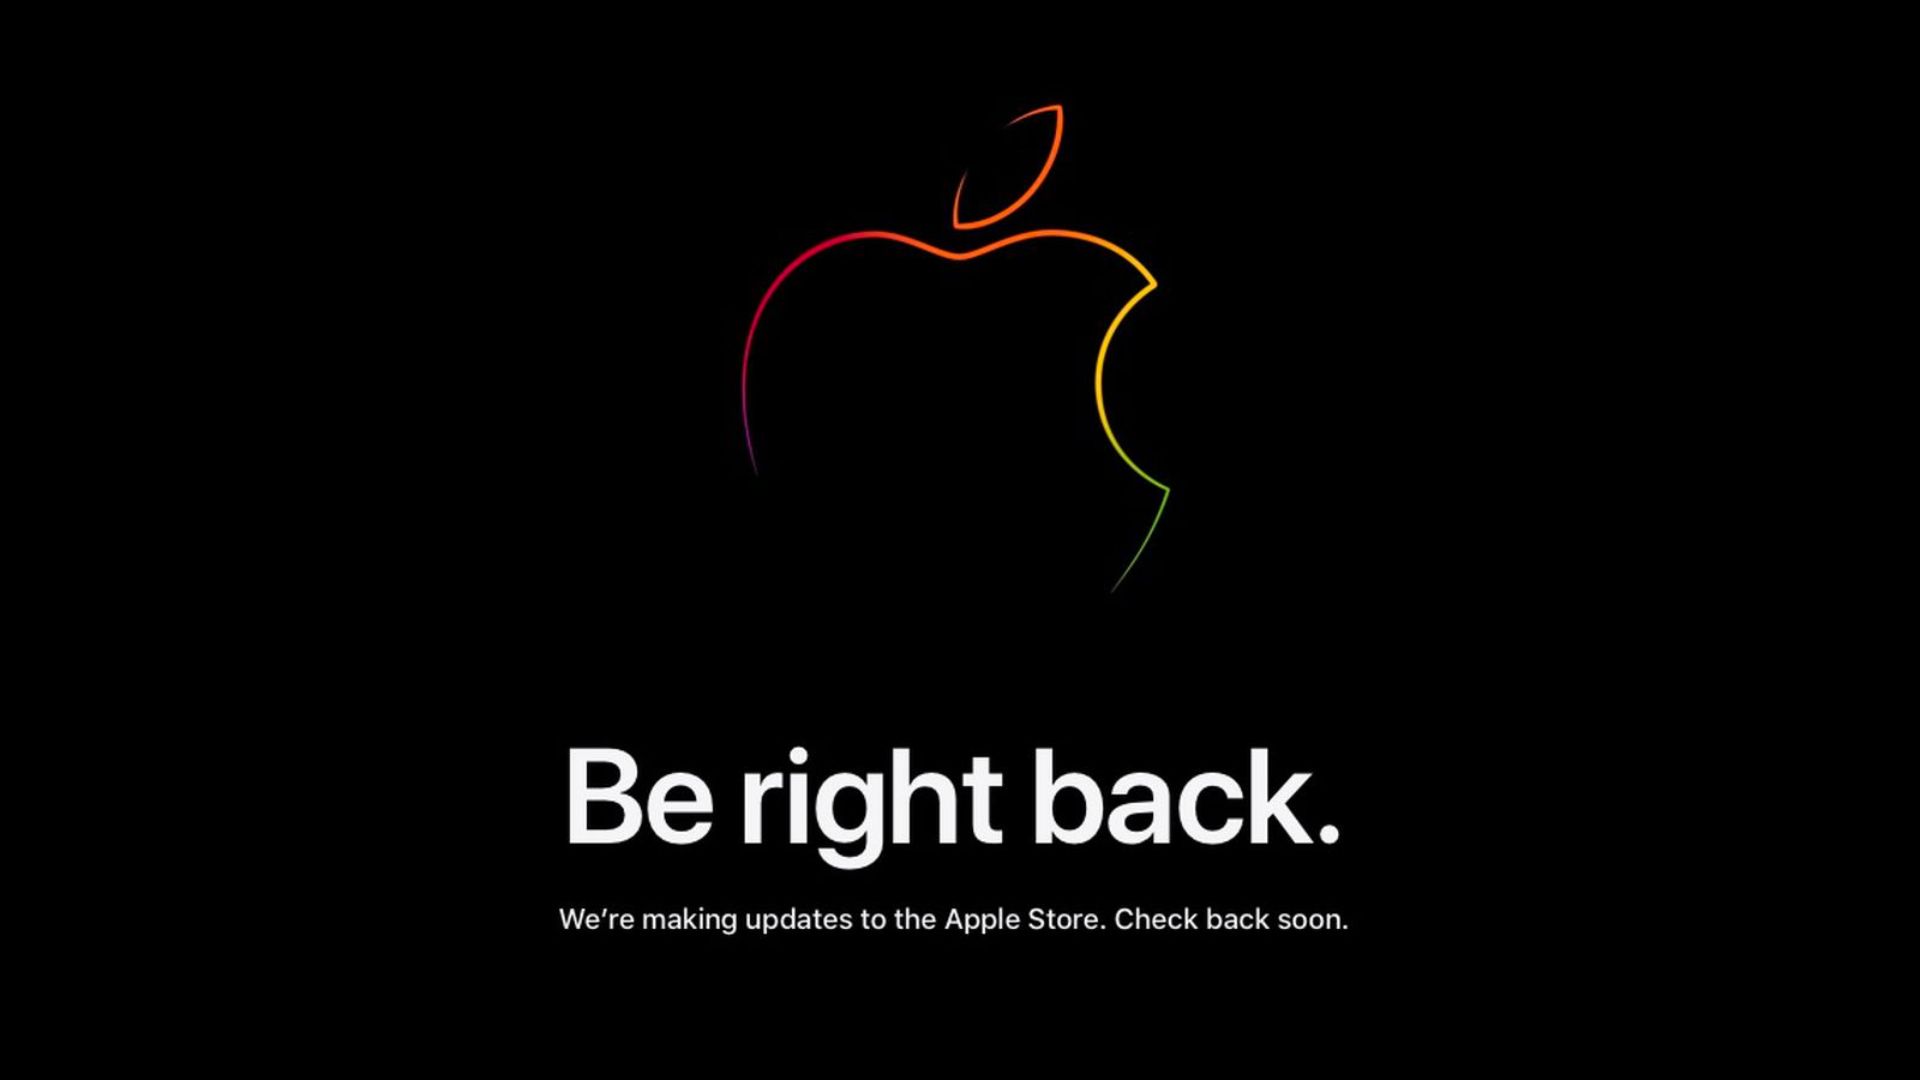 Apple's online store prior to a product launch.